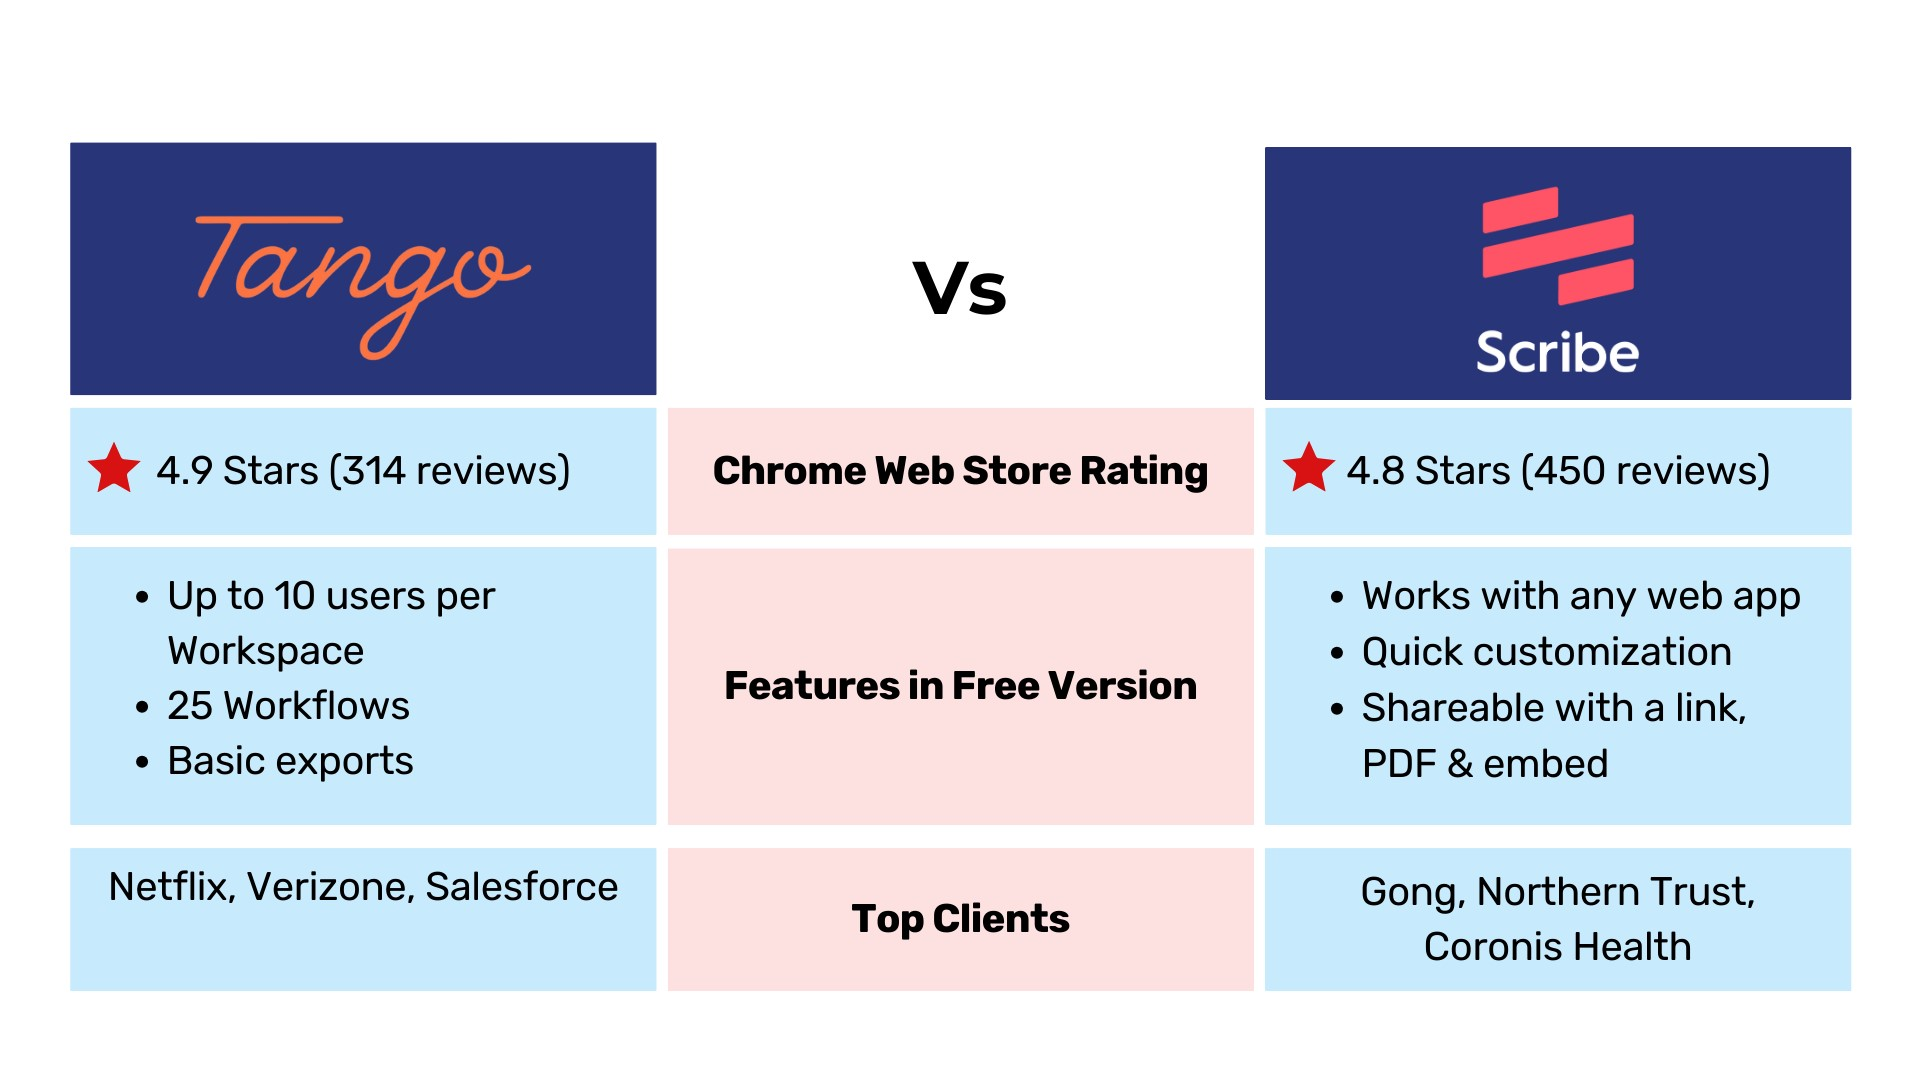 Tango Vs Scribe comparison table with rating, features, top clients